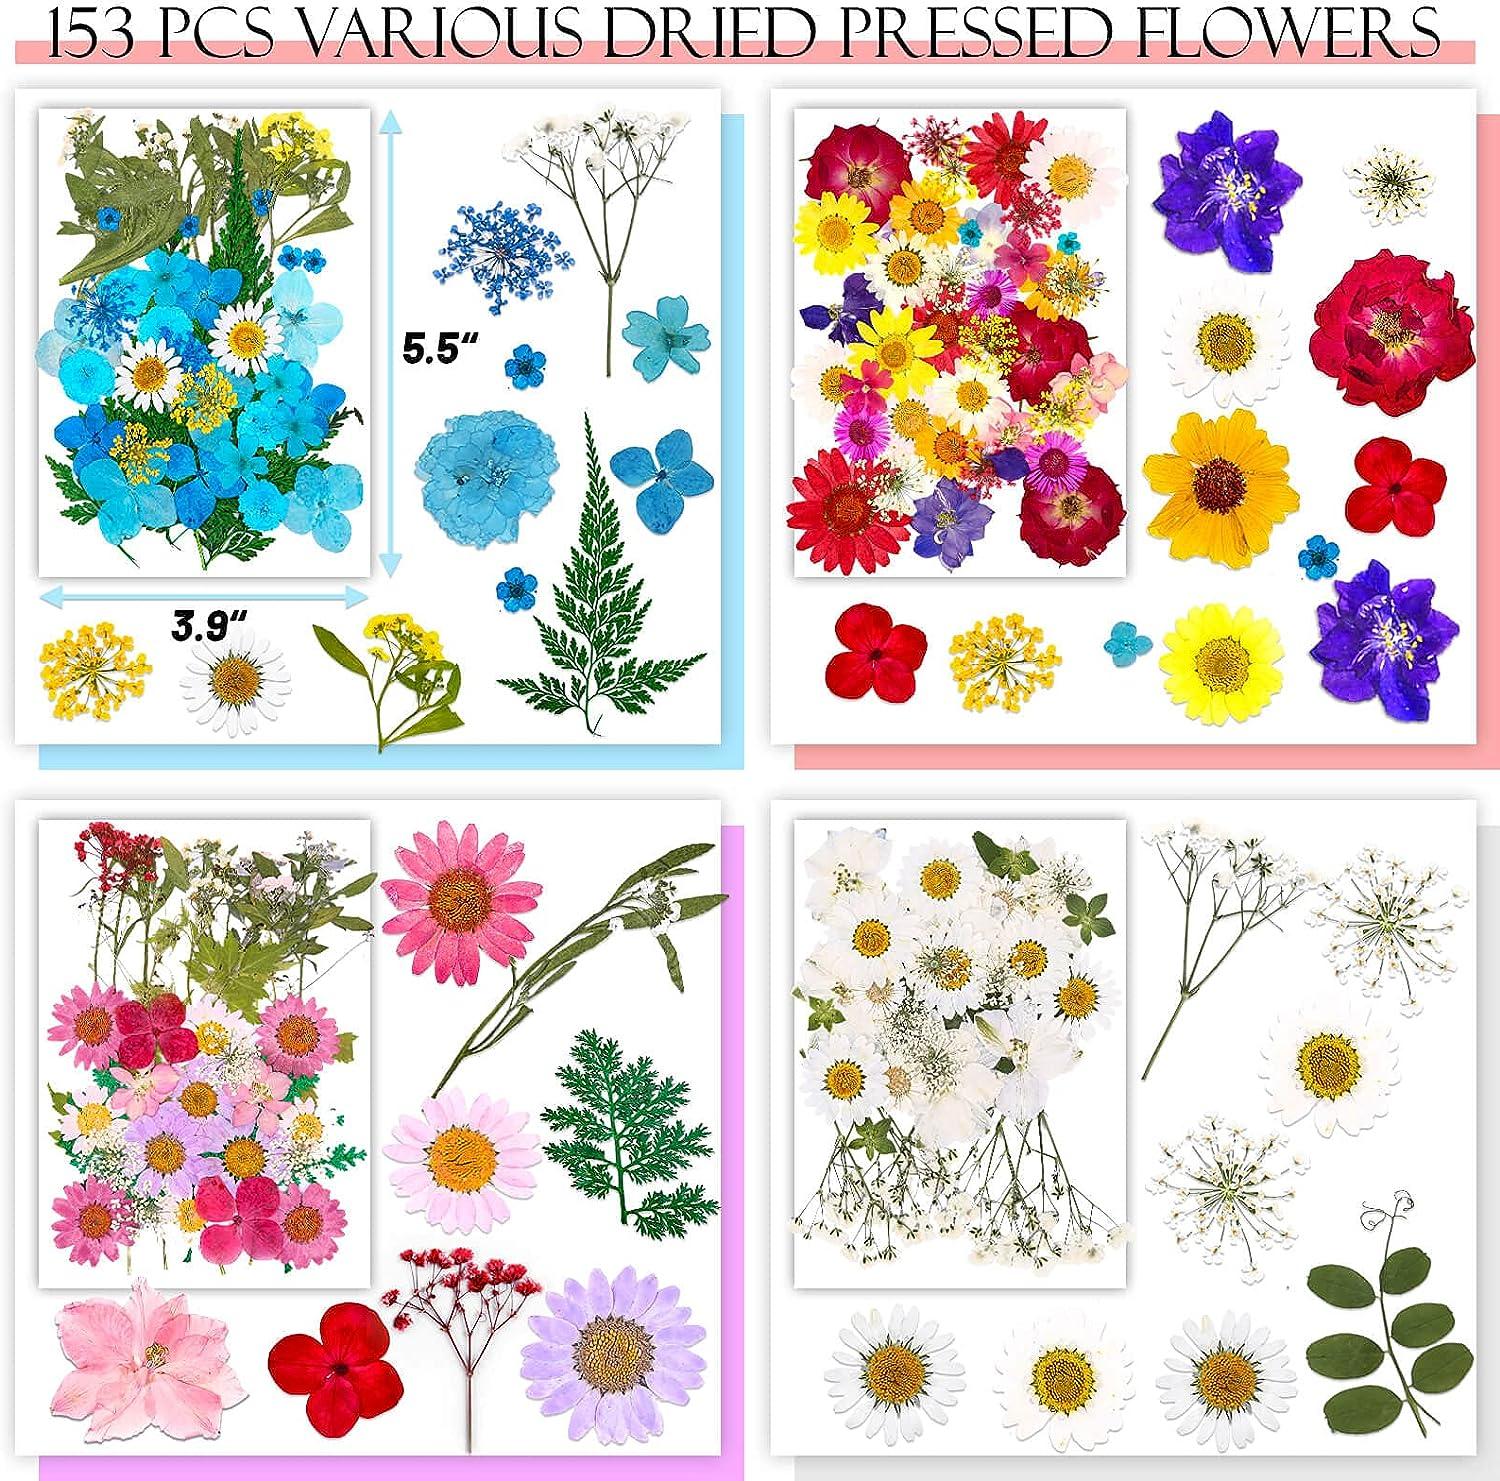 Evatage 153Pcs Dried Pressed Flowers for Resin Real Pressed Flowers with  Tweezers Multiple Colorful Resin Dry Flowers Bulk for Craft Resin Mold  Jewelry Making Candle and Nails Decoration